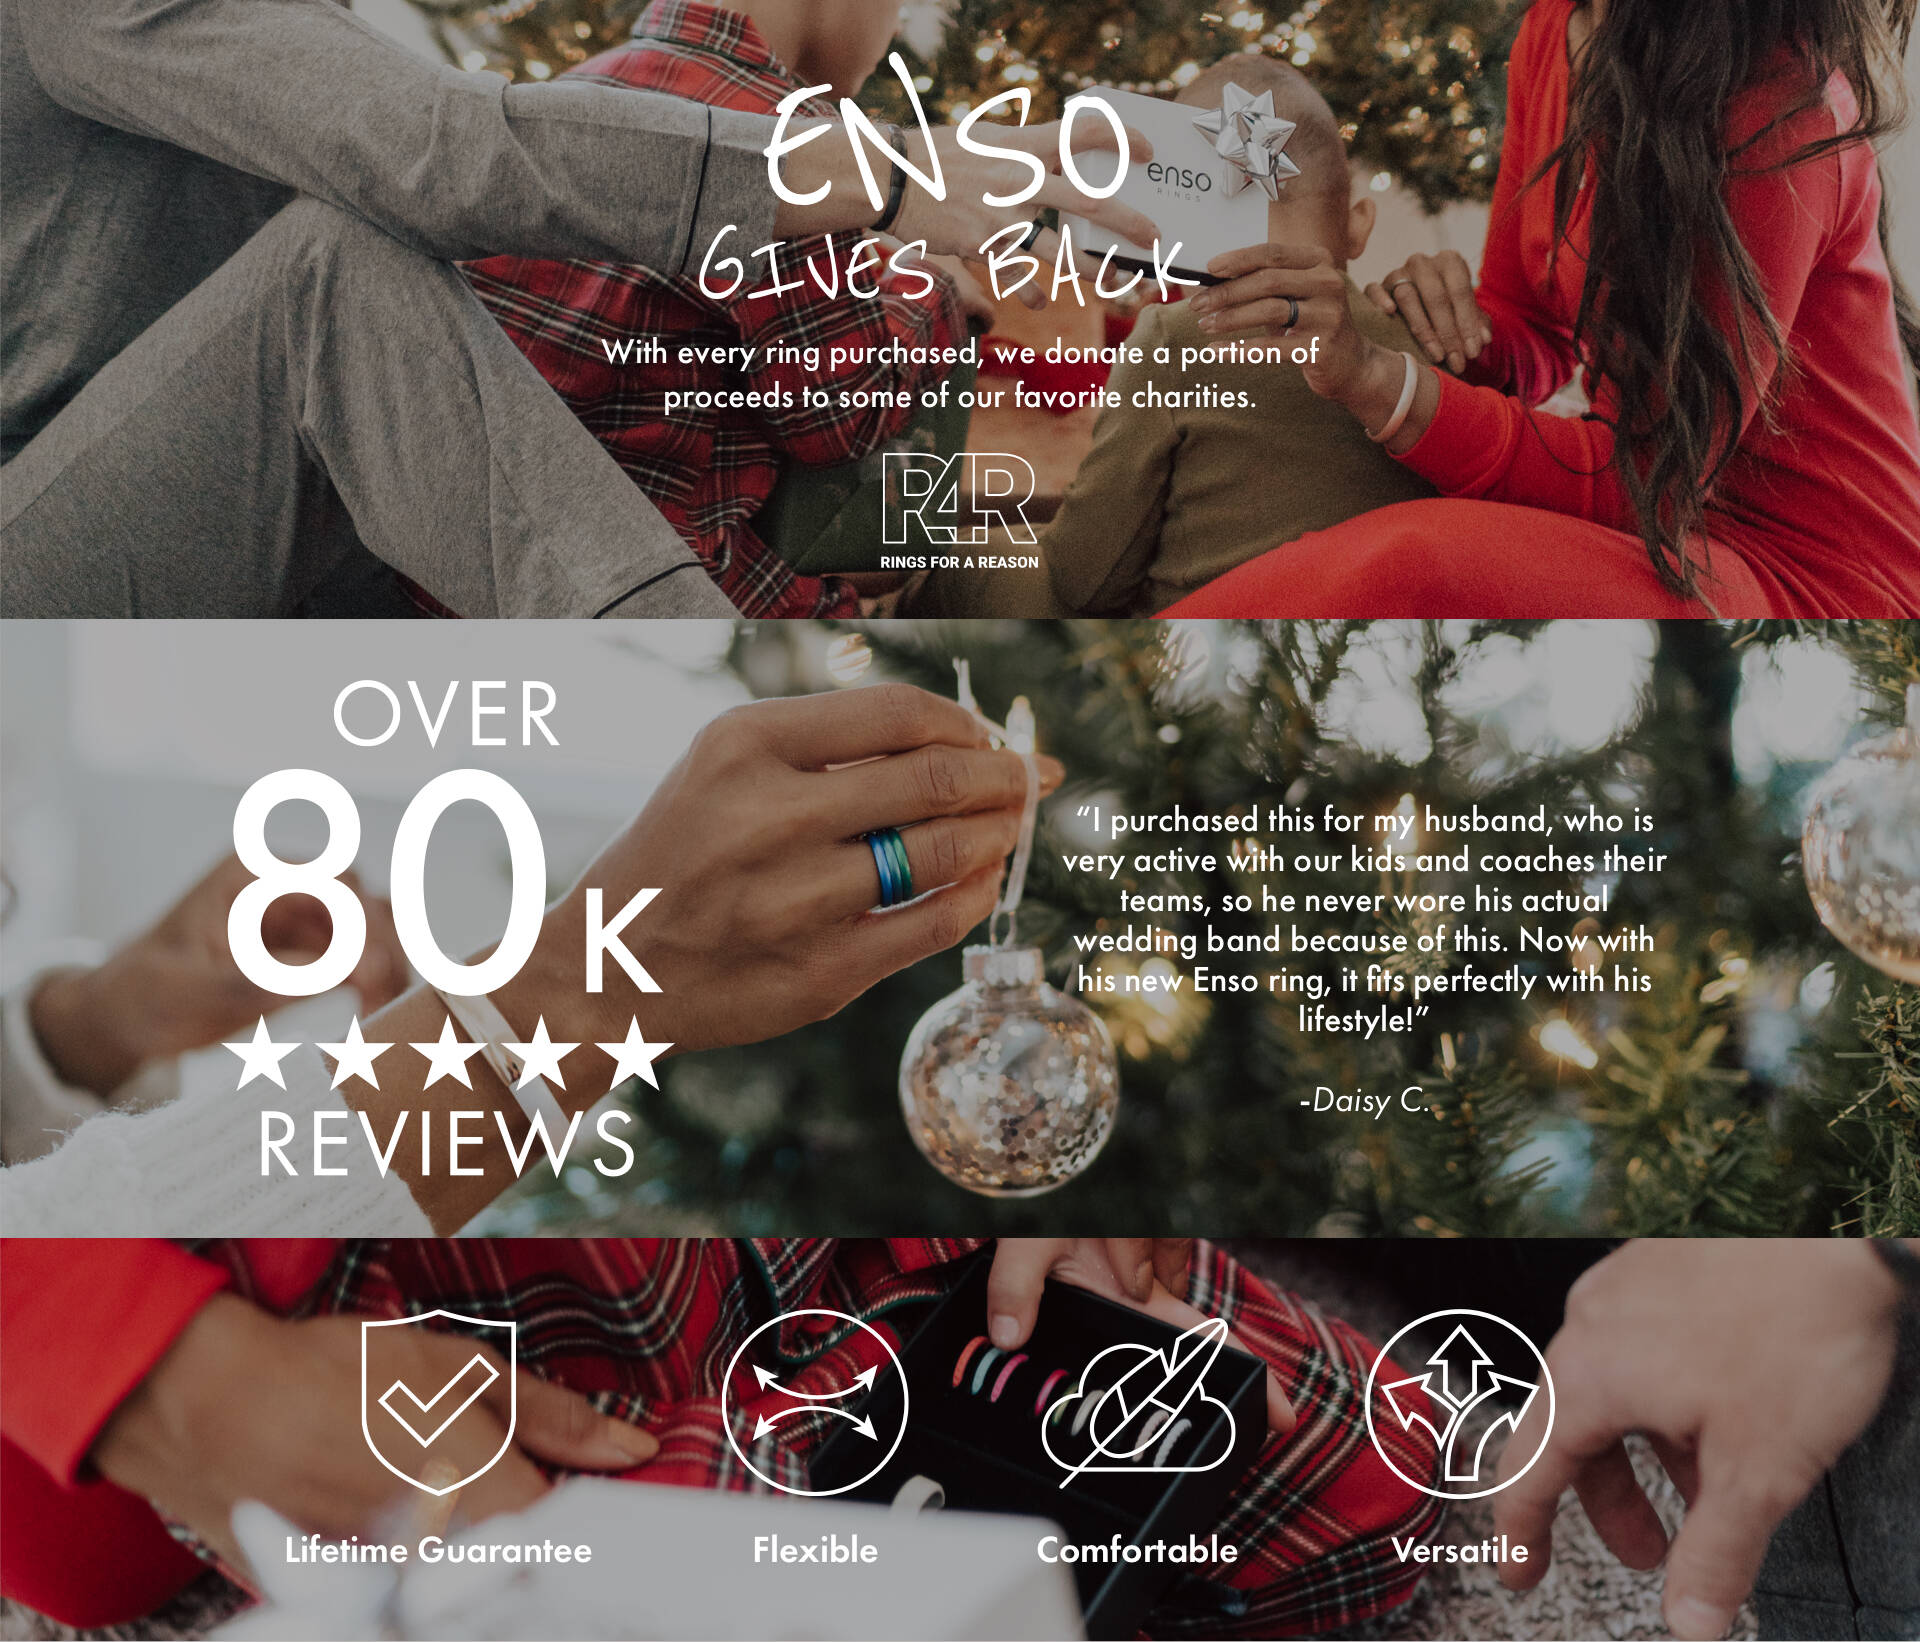 Enso Rings have a lifetime guarantee and are made in the USA